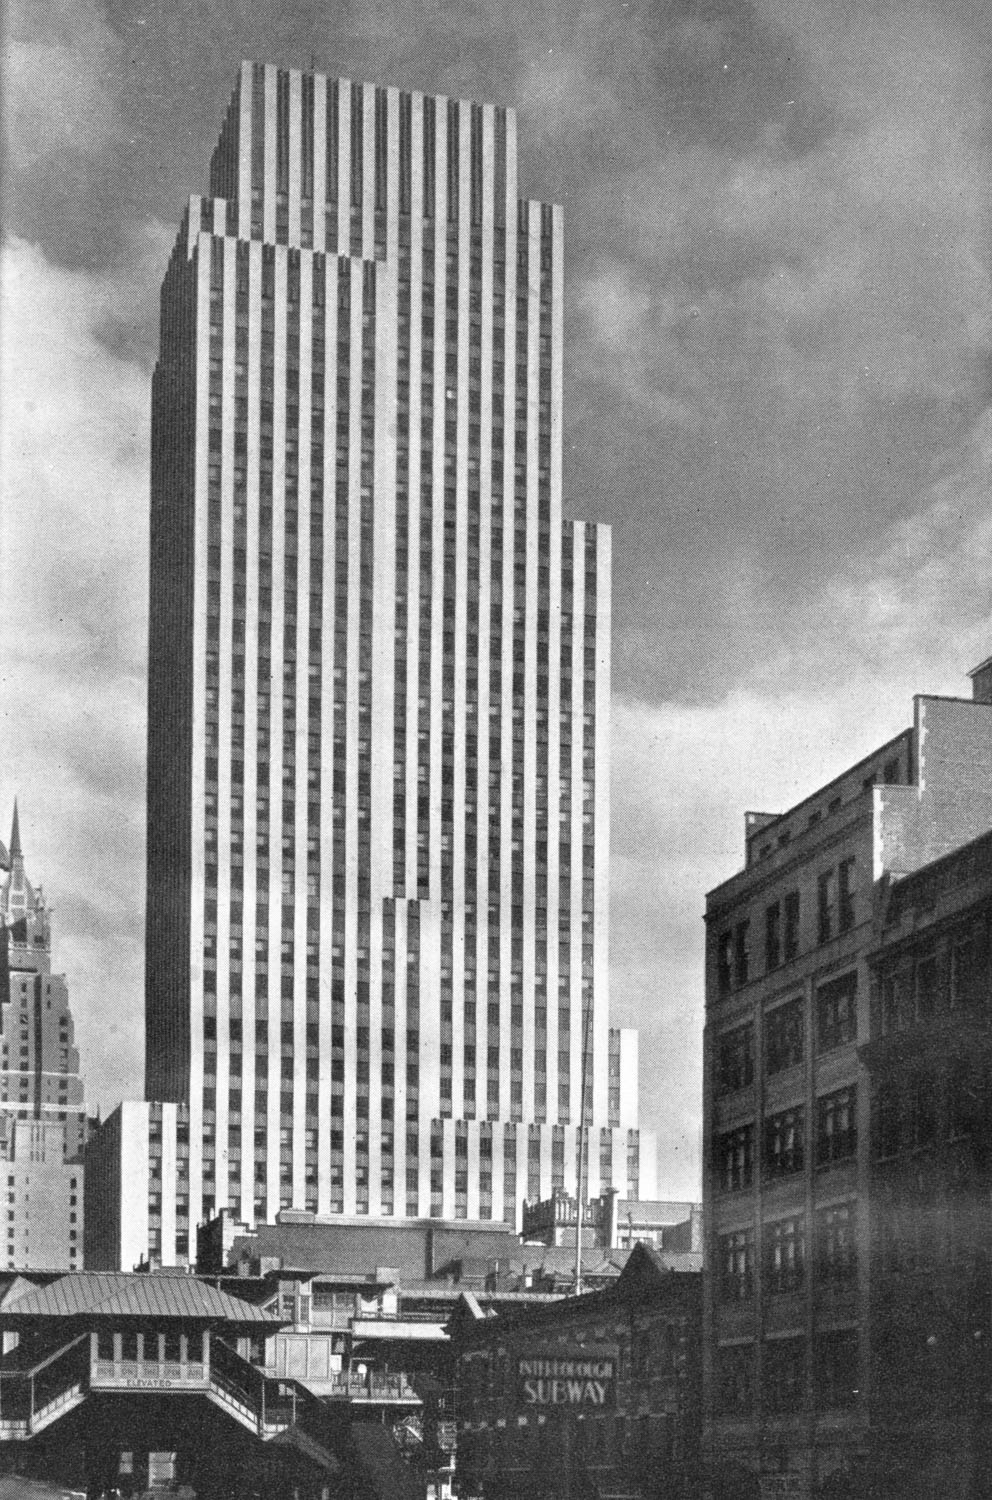 A black and white photograph of a skyscraper taken from street level a few blocks away. The facade of the building is made up of thin alternating bands of light and dark. The bands are continuous, running from the lower portion of the building all the way to the top. There is no ornament at the top of the building; the bands end where the building does. The building is a large slab, similar to the proportions of a cereal box, and only has a few, very small setbacks.